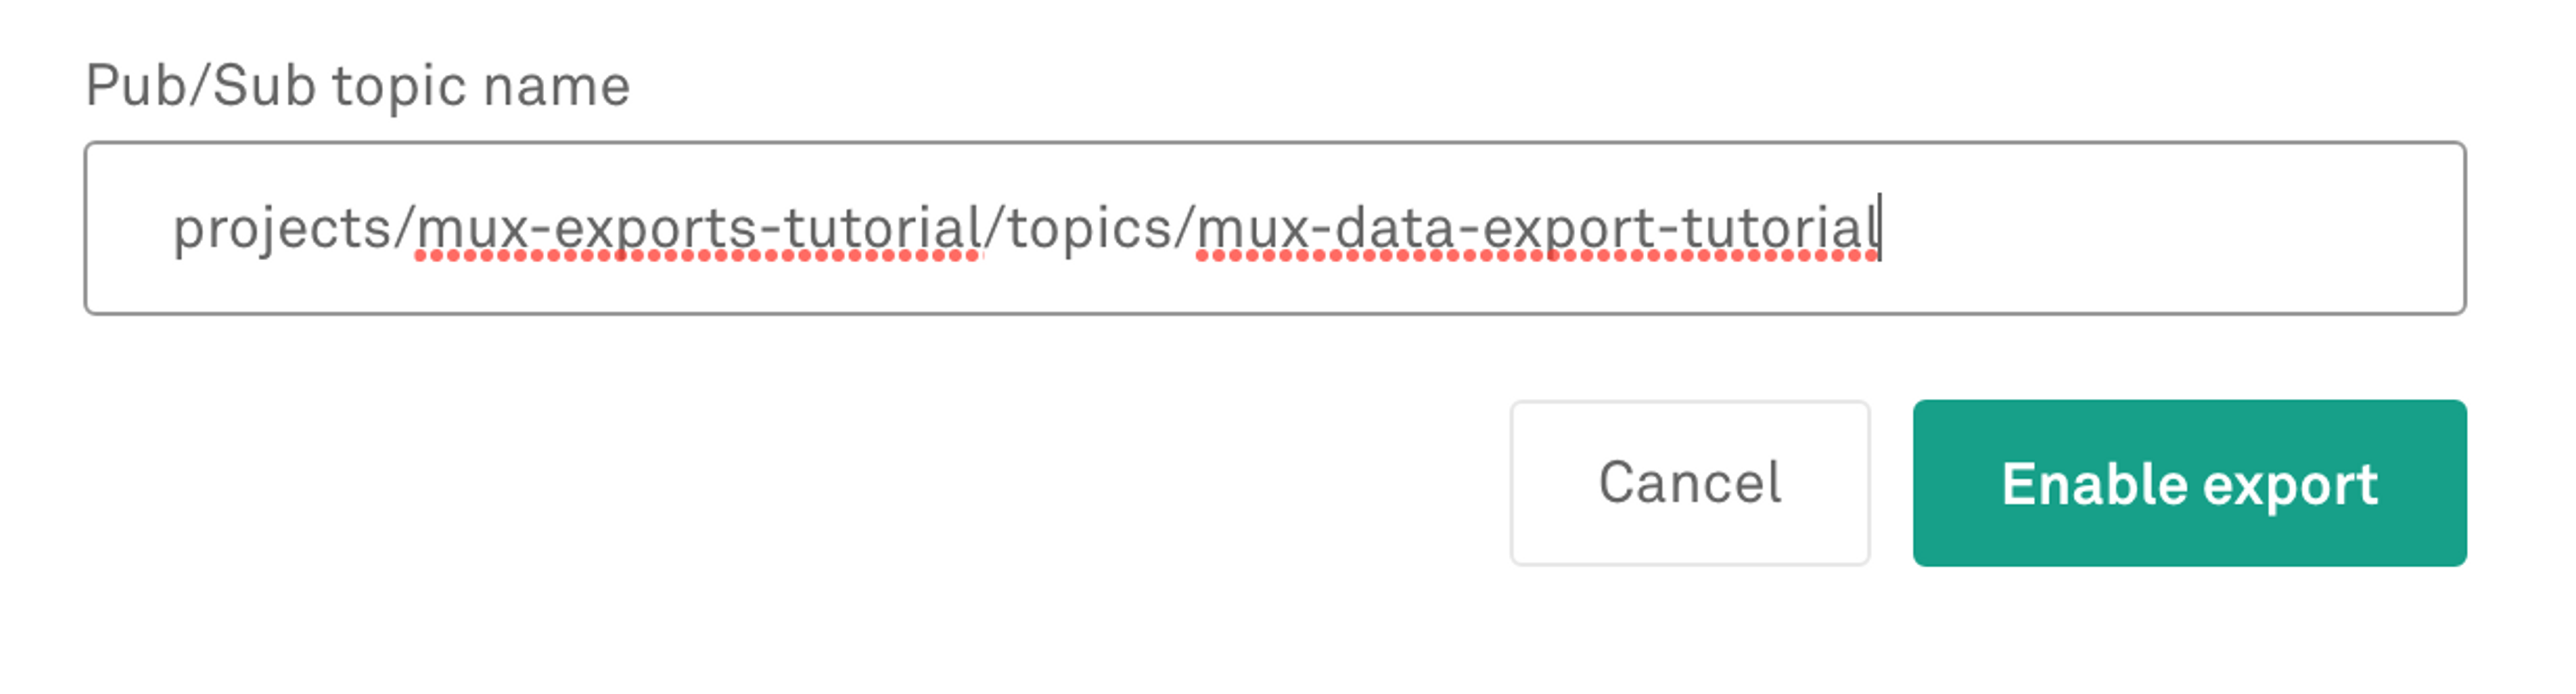 A screenshot of the "Pub/Sub topic name" field within the Mux dashboard, populated with the value of our example topic name.